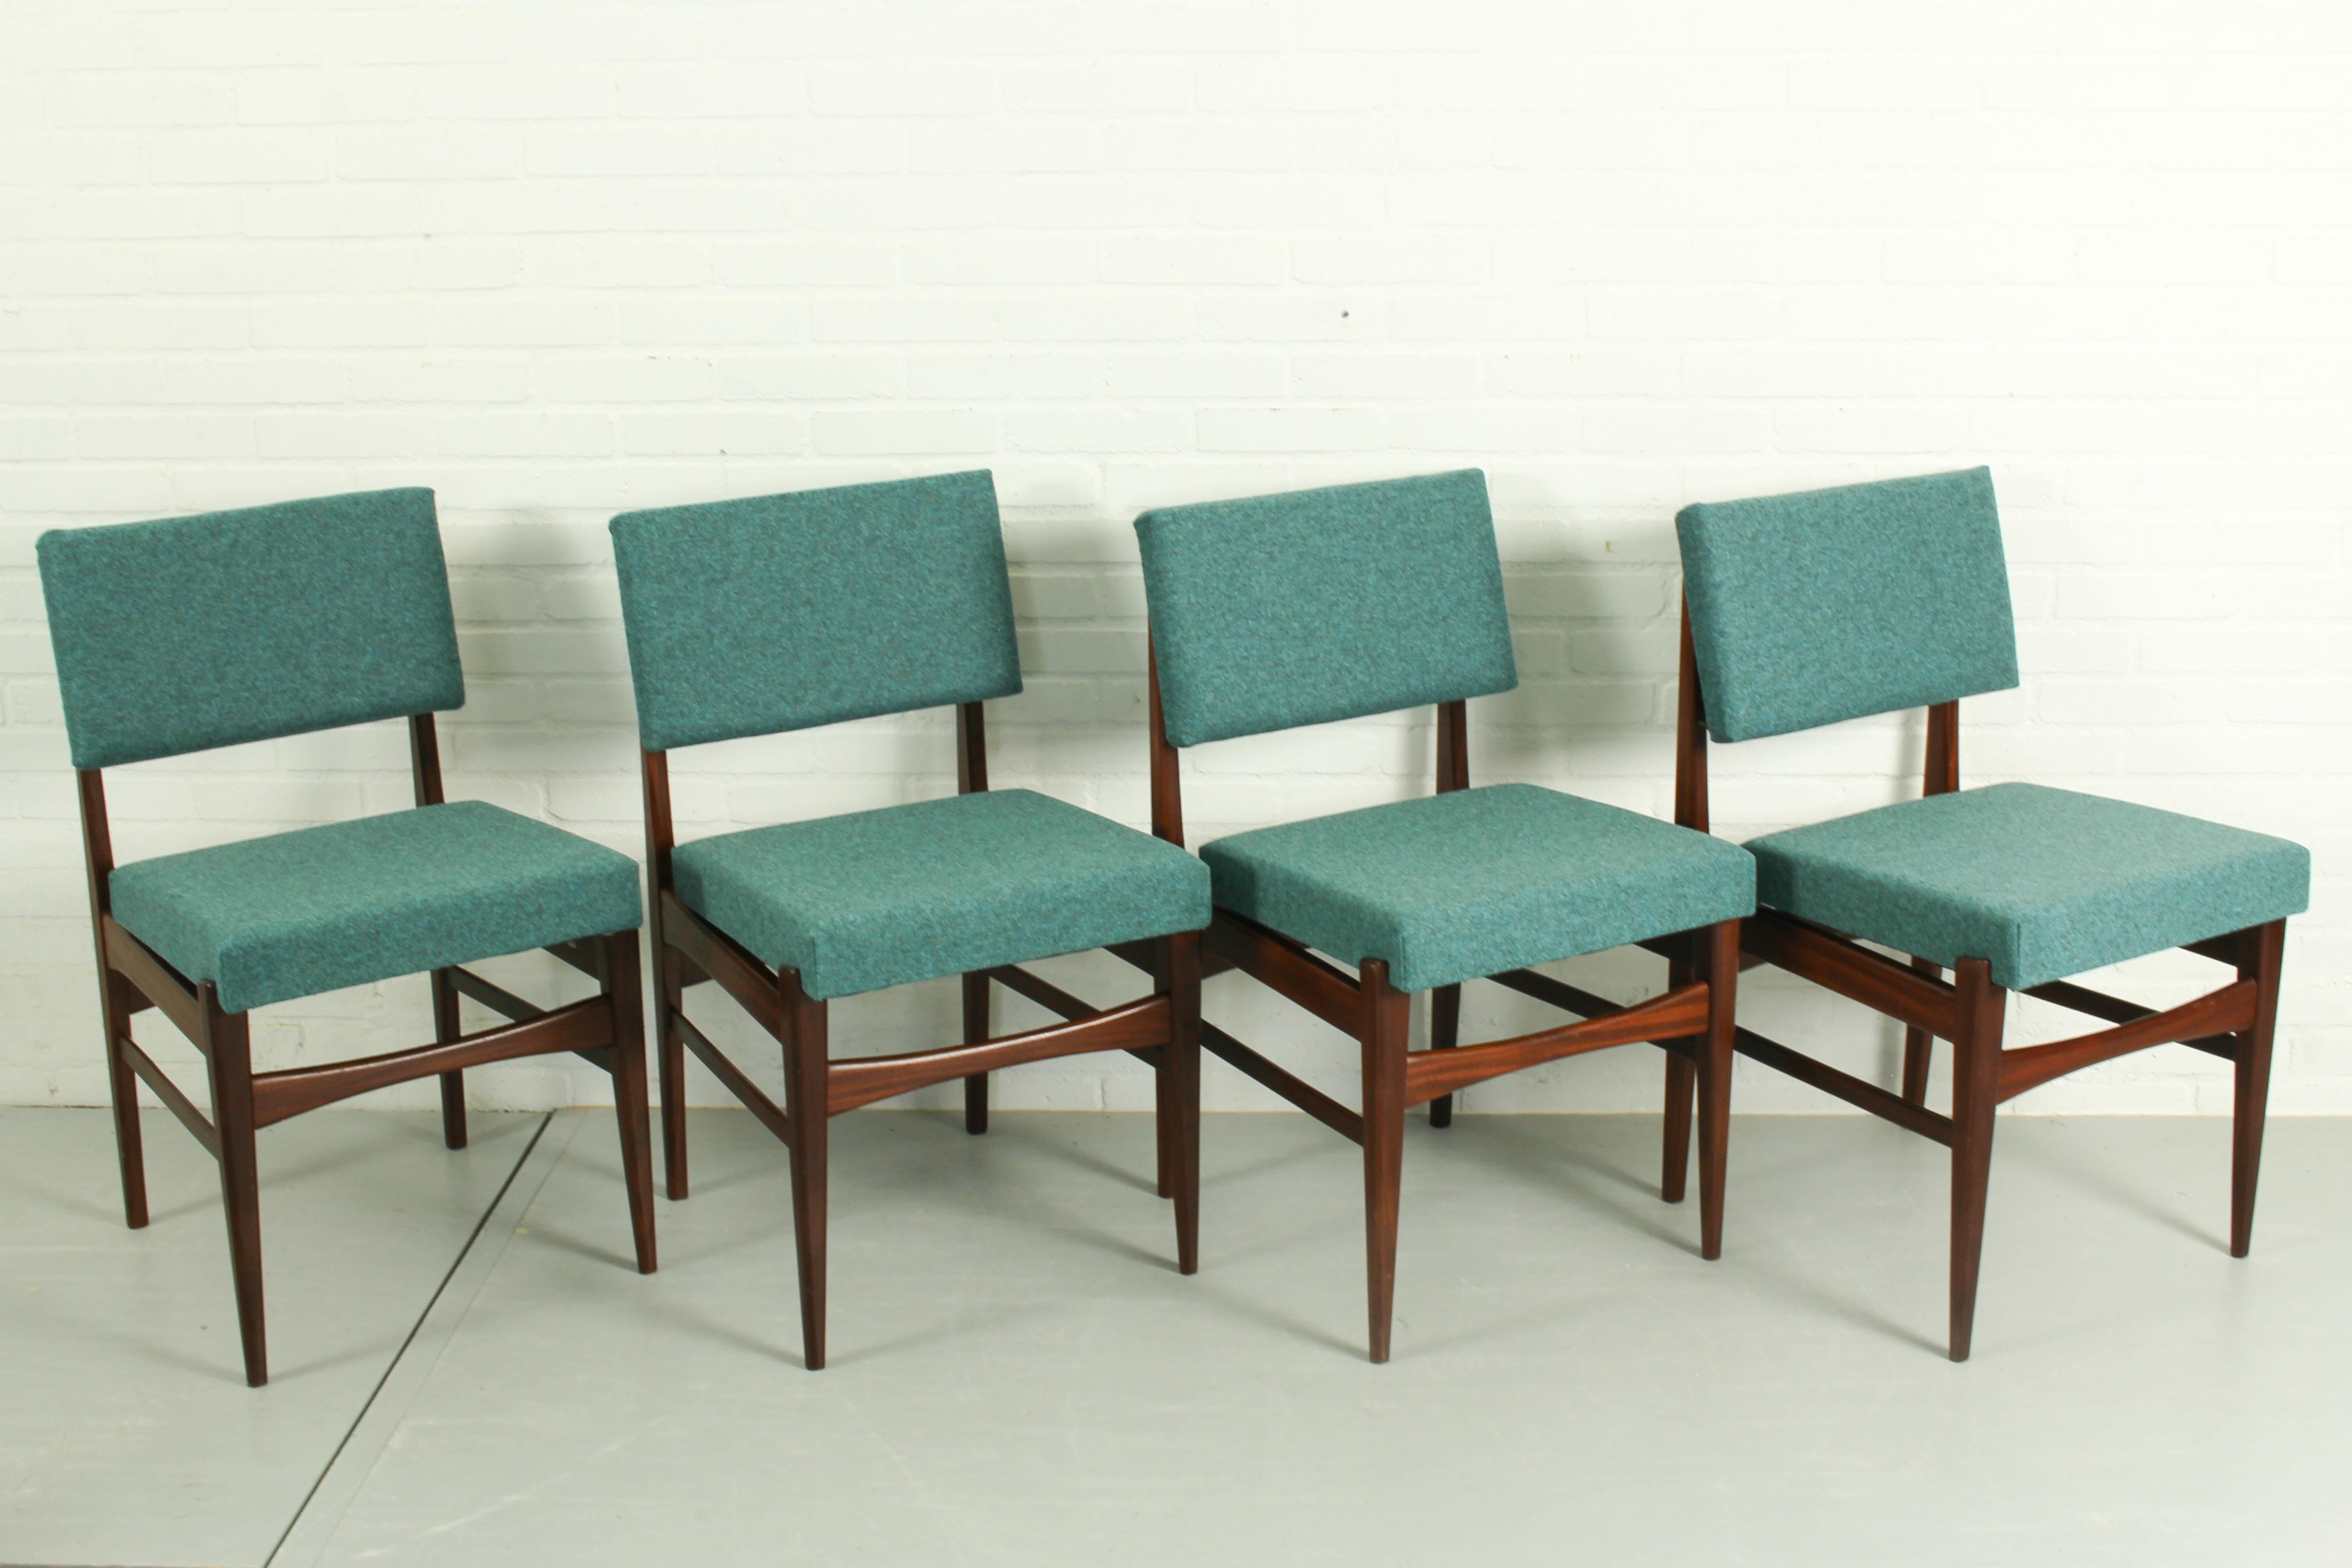 Wool Dining chairs and Dining Table by Louis van Teeffelen for Wébé, The Netherlands  For Sale